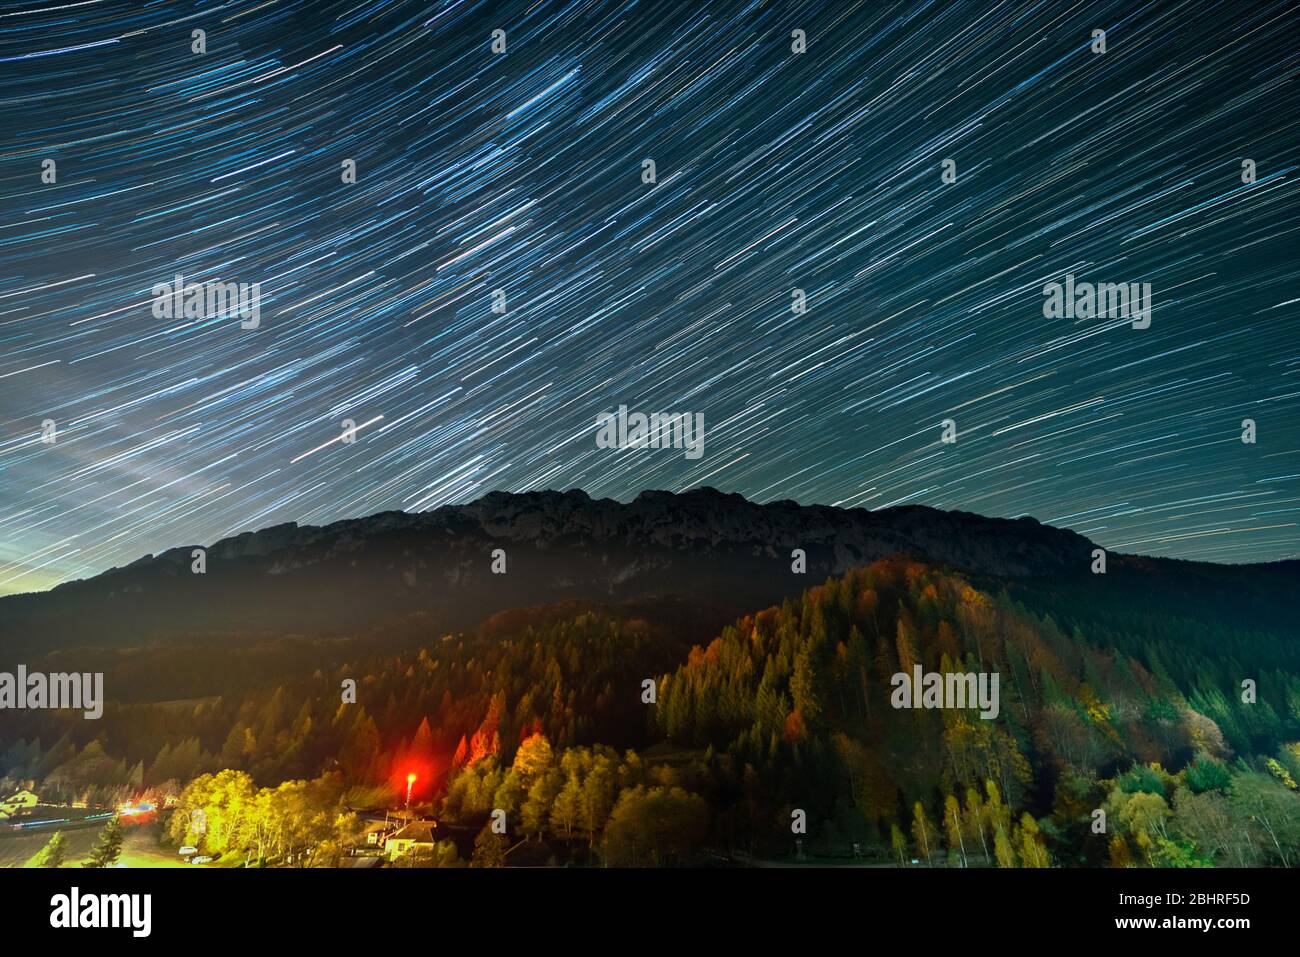 Star trails over the Plaiul Foii resort in Piatra Craiului mountains from Romania Stock Photo